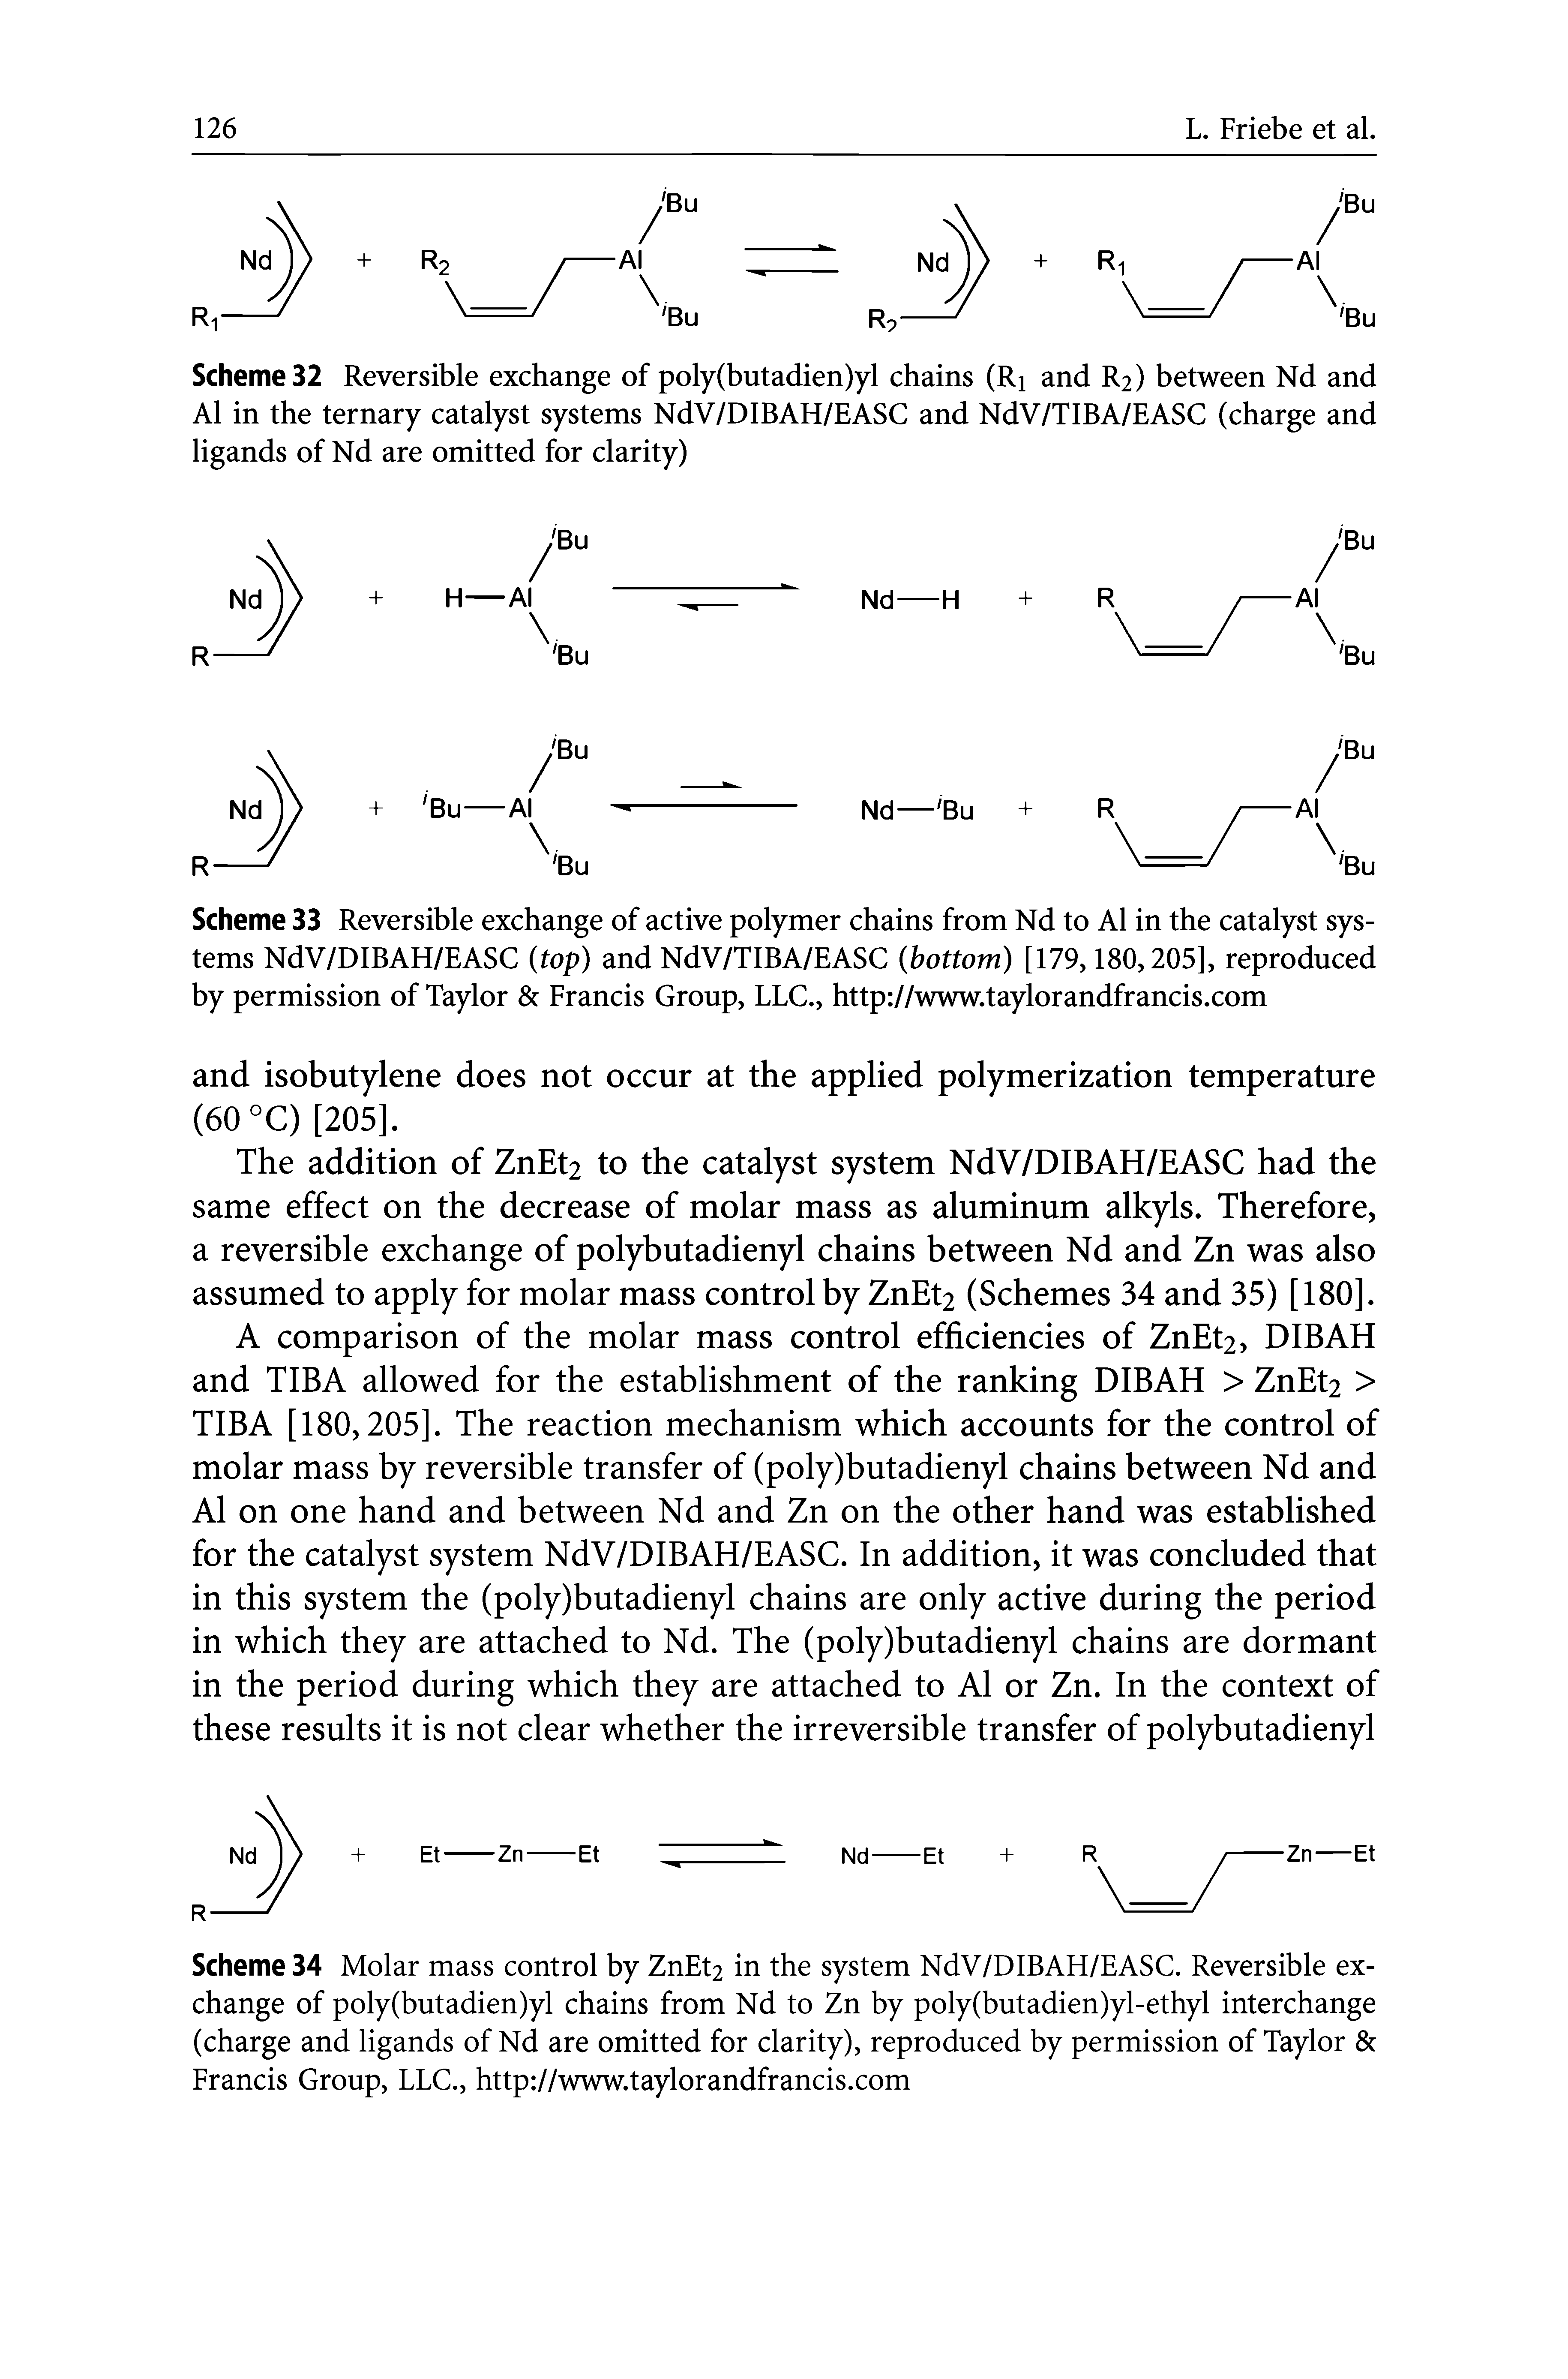 Scheme 34 Molar mass control by ZnEt2 in the system NdV/DIBAH/EASC. Reversible exchange of poly(butadien)yl chains from Nd to Zn by poly(butadien)yl-ethyl interchange (charge and ligands of Nd are omitted for clarity), reproduced by permission of Taylor Francis Group, LLC., http //www.taylorandfrancis.com...